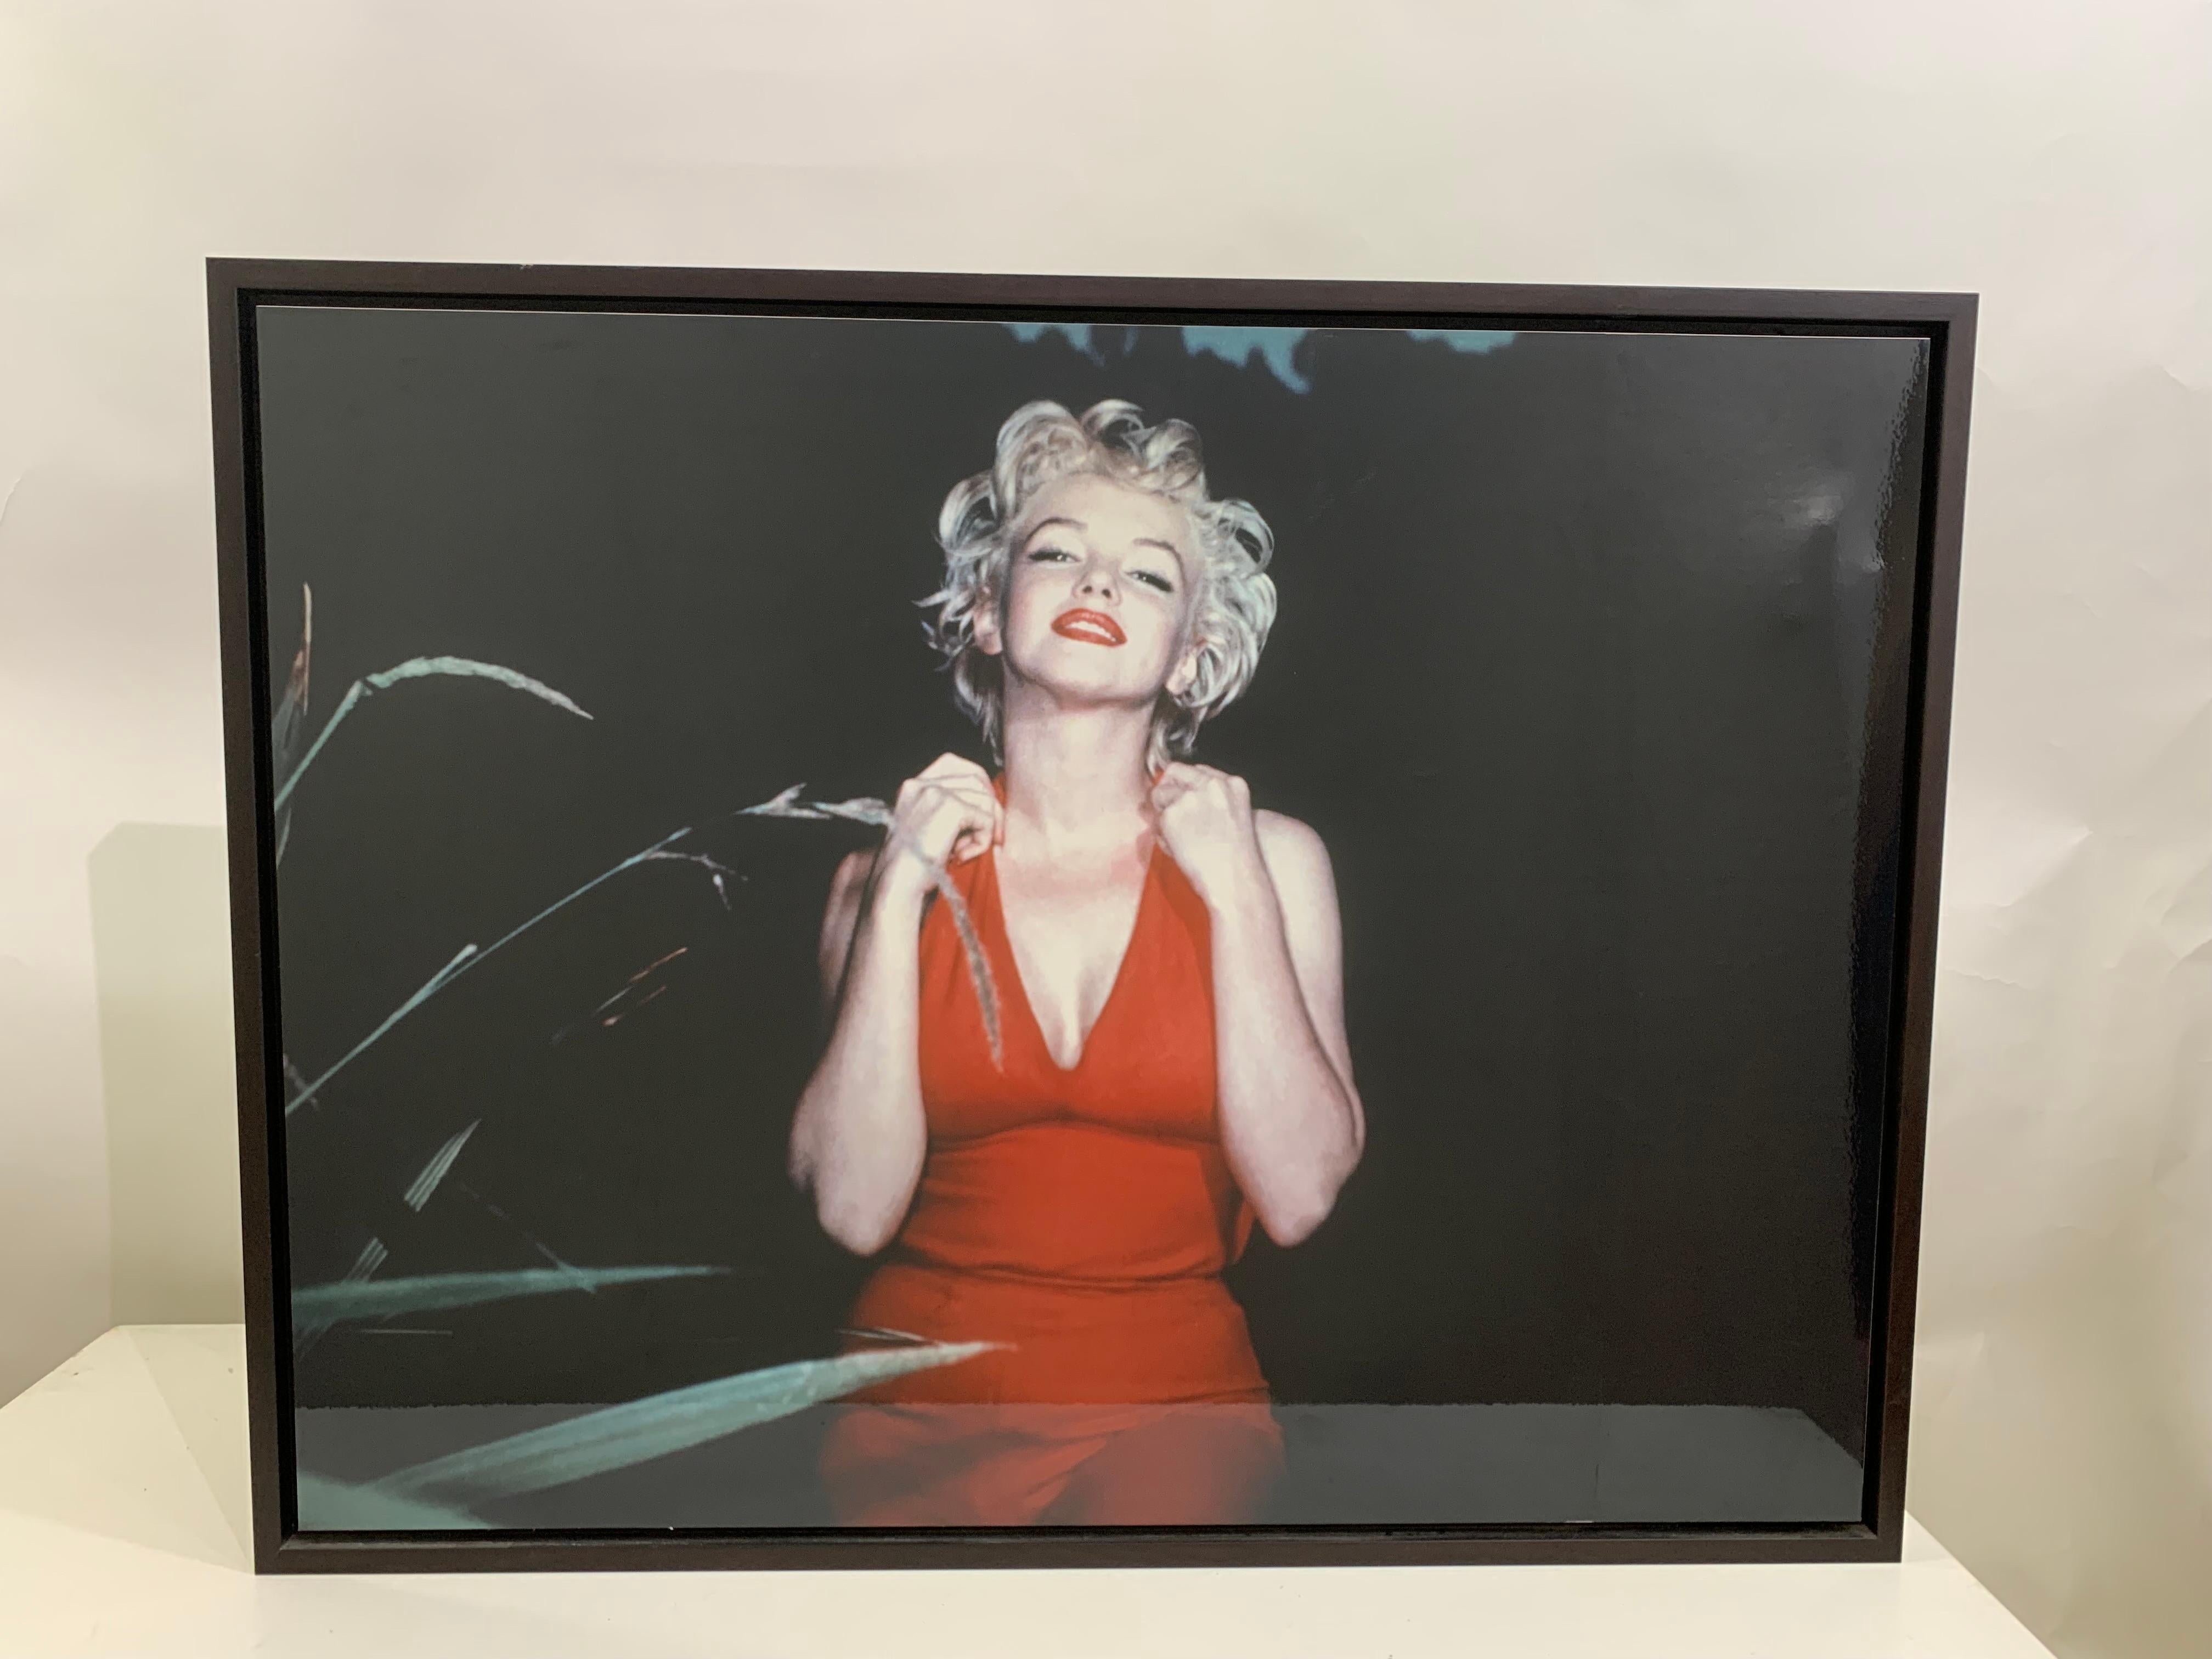 Lumas framed photograph of Marilyn Monroe. American actress starring in a number of commercially successful films during the 1950s, and who is considered a pop culture icon.
Photo taken by : Baron, 1954
Photograph Size : 86.5 x 65.1 cm 
Frame